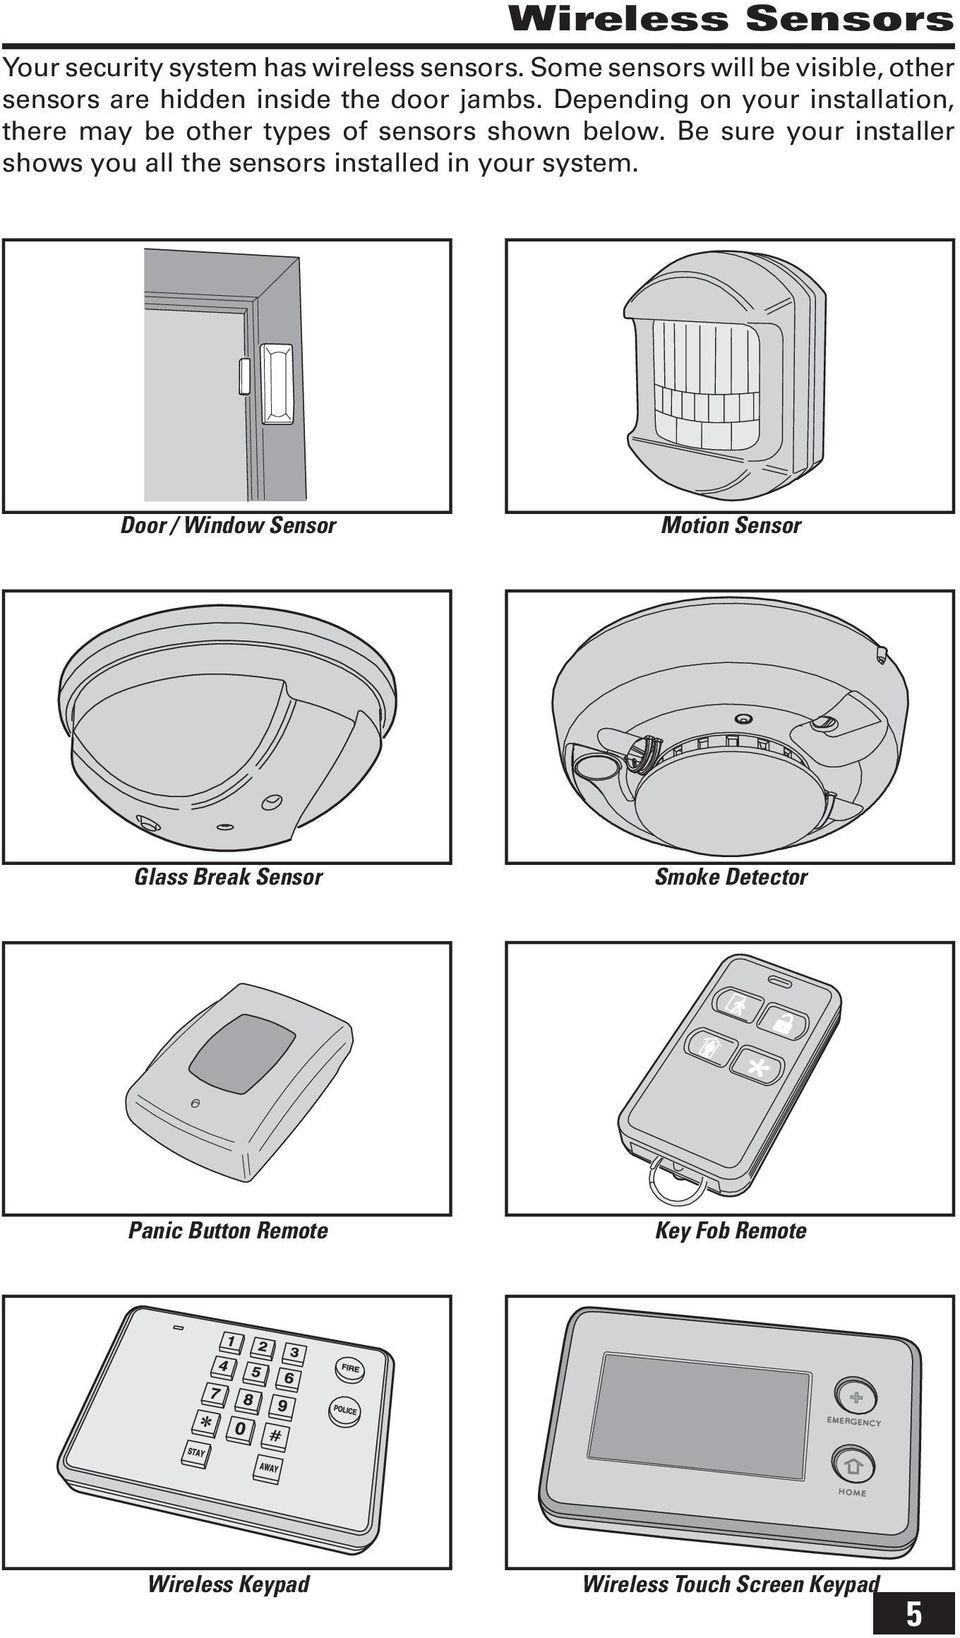 Depending on your installation, there may be other types of sensors shown below.